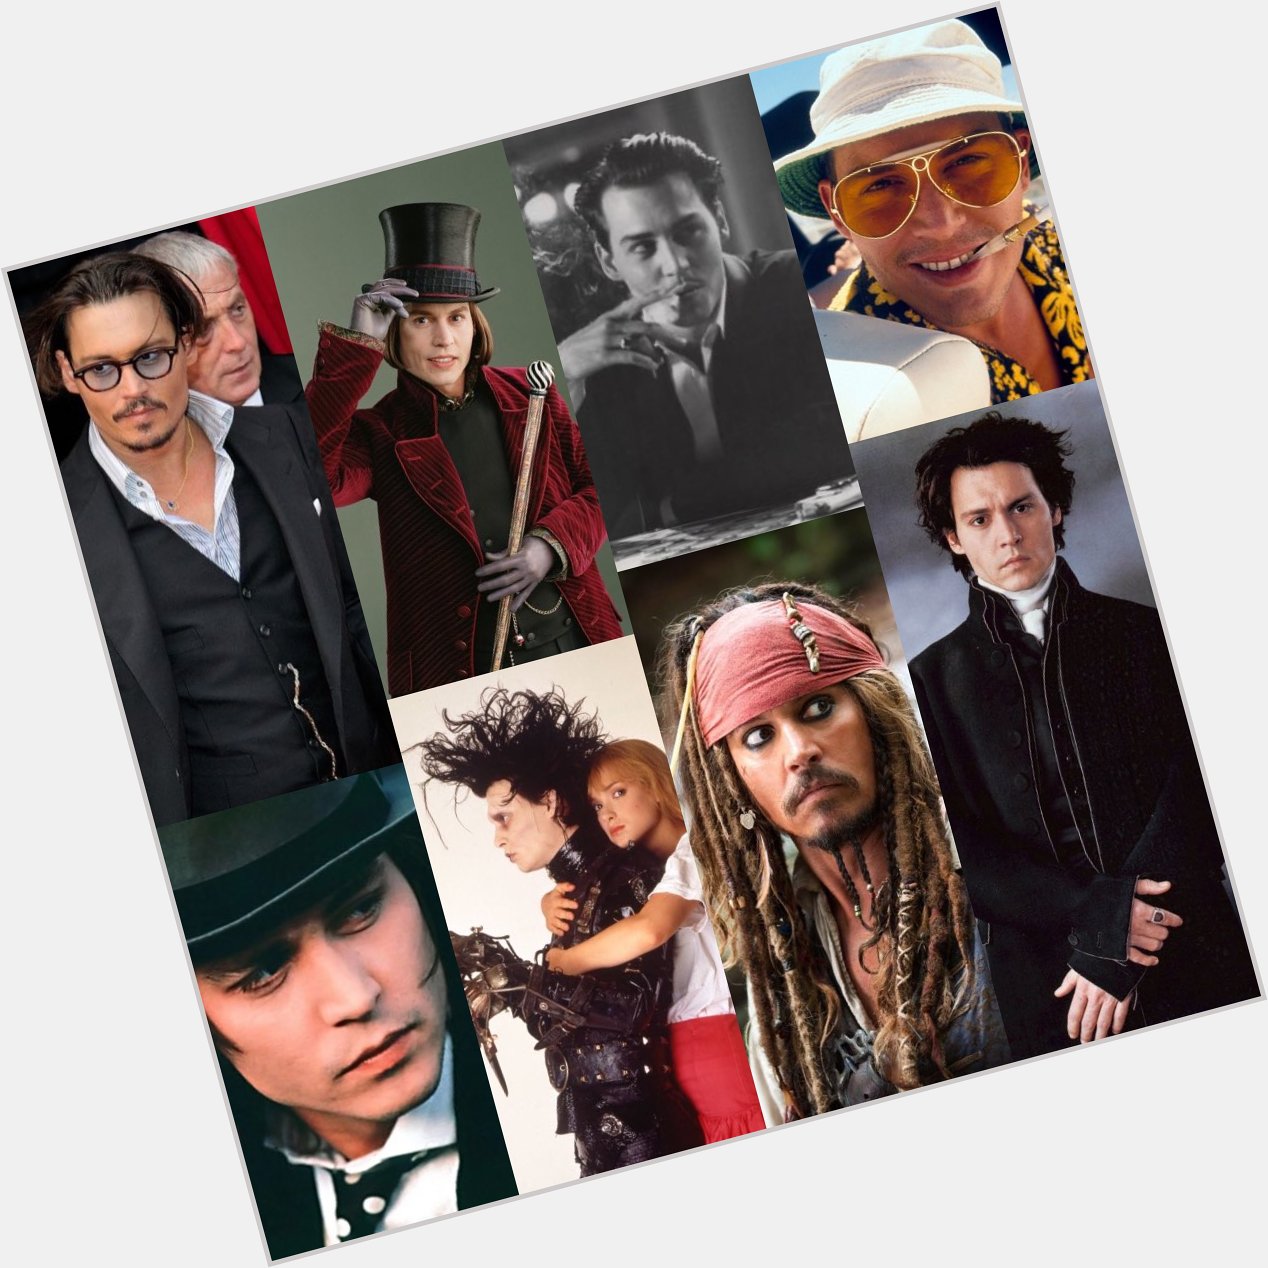 Happy birthday to American actor, producer, and musician Johnny Depp, born June 9, 1963. 